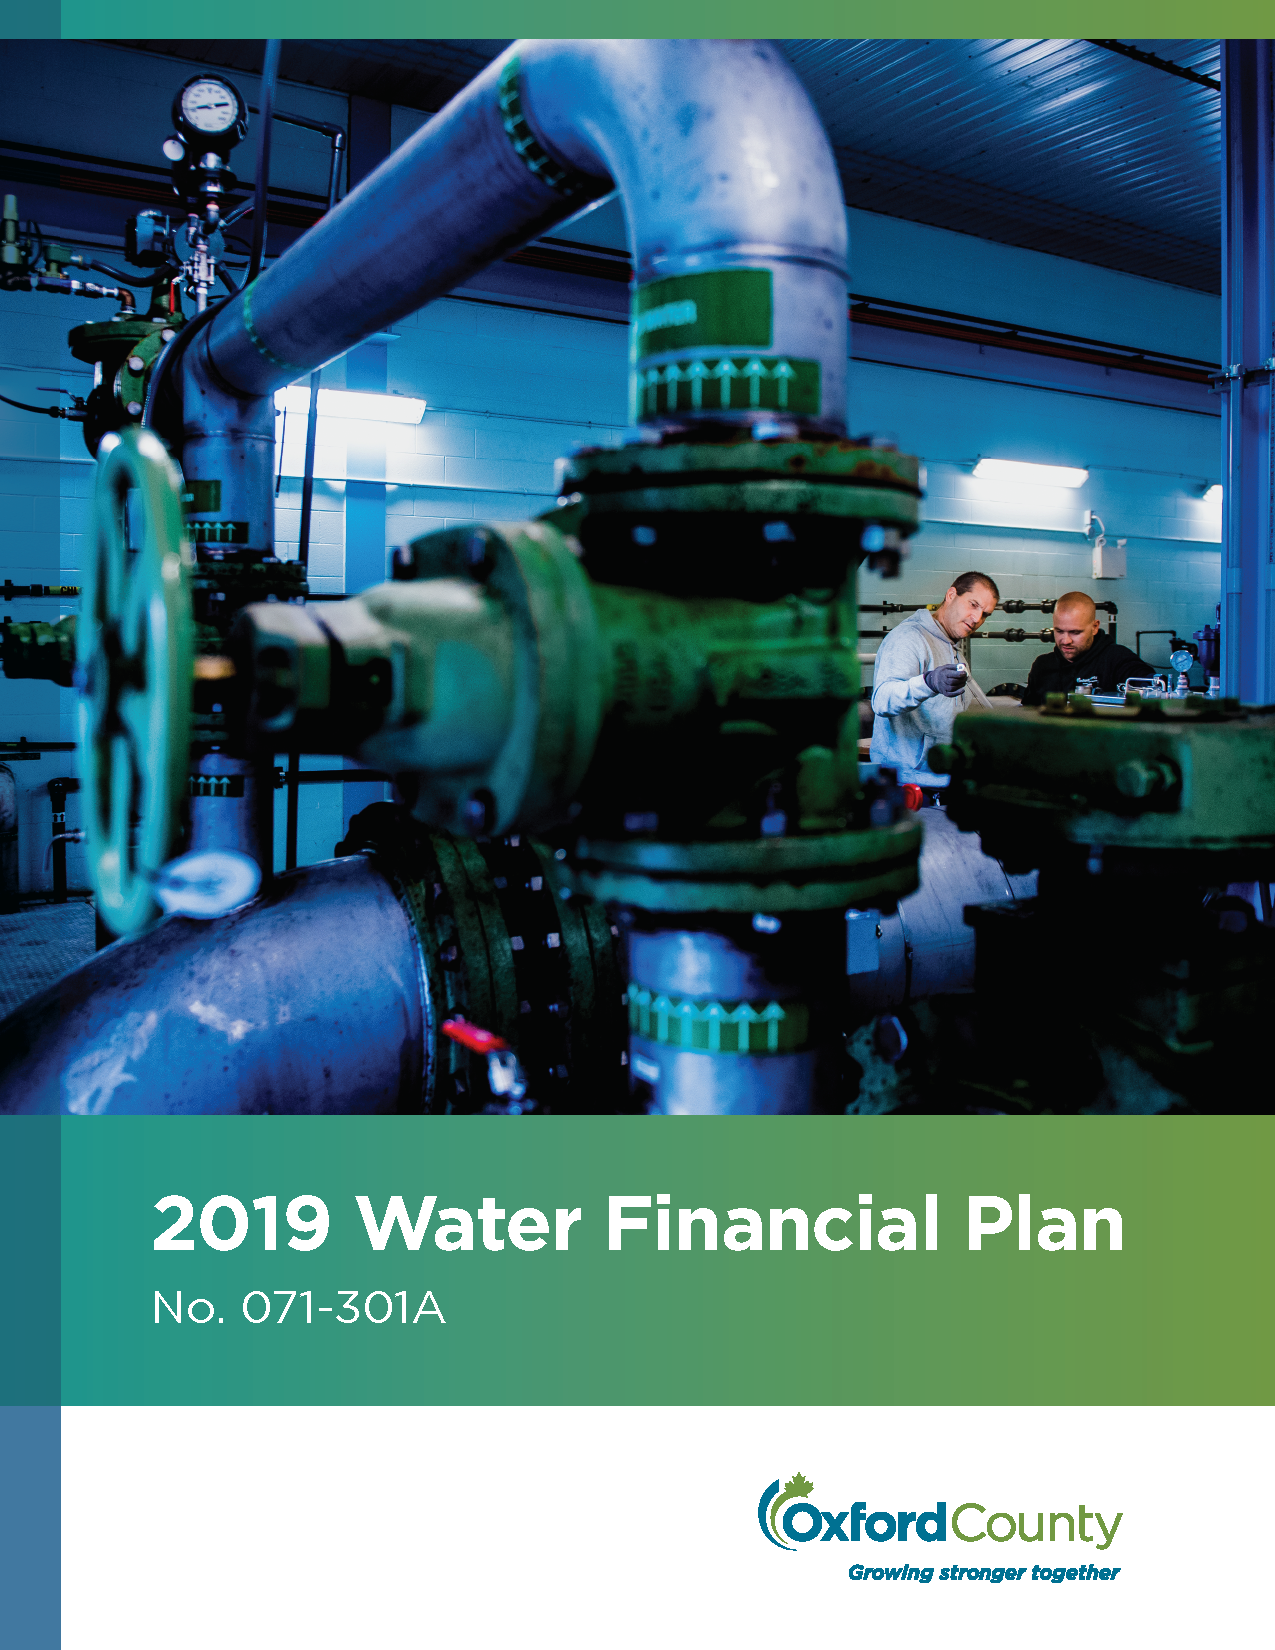 water financial plan cover image - water pump